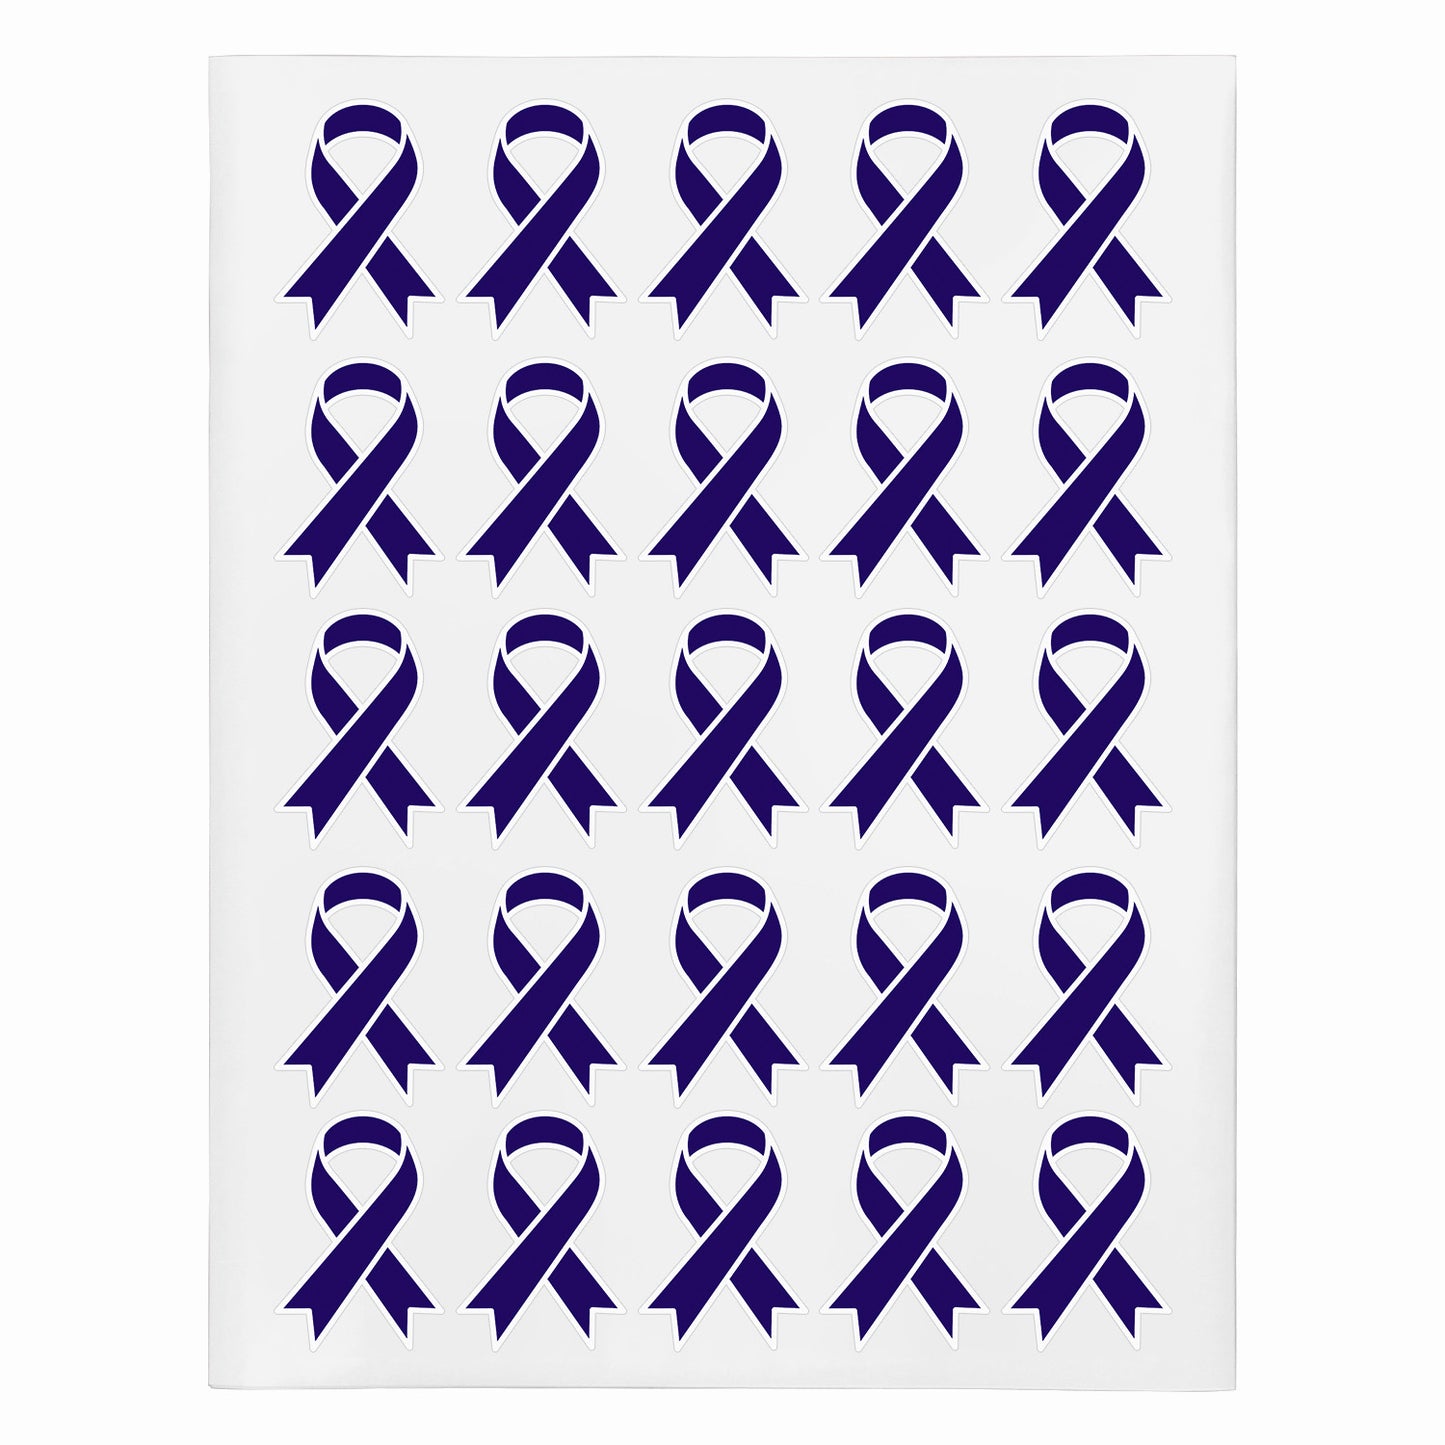 2.2 x 1.6 inch | Awareness: Child Abuse Prevention  Awareness Ribbon Stickers